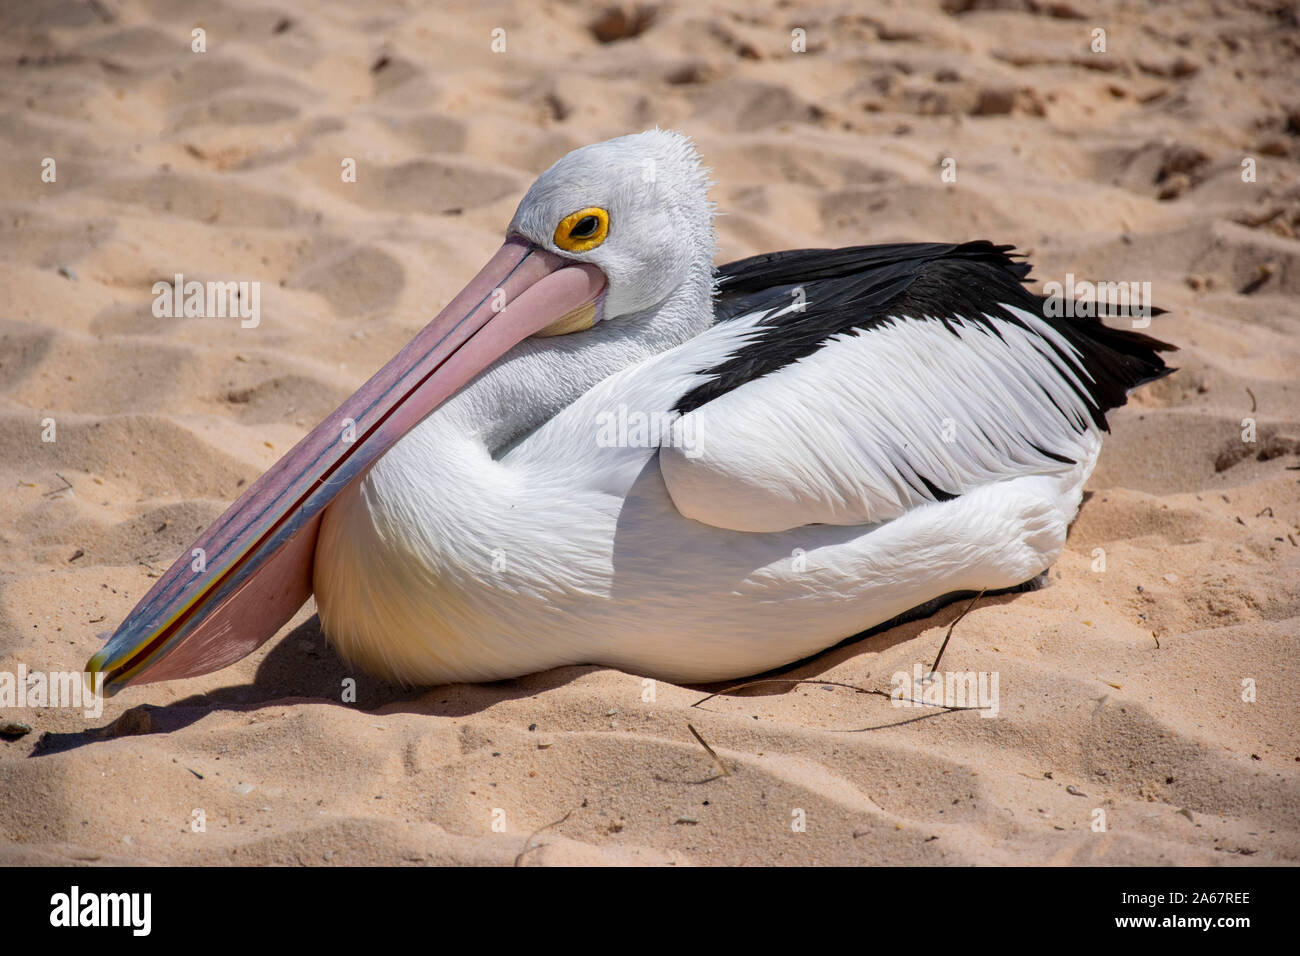 A picture of a pelican on sand. Stock Photo